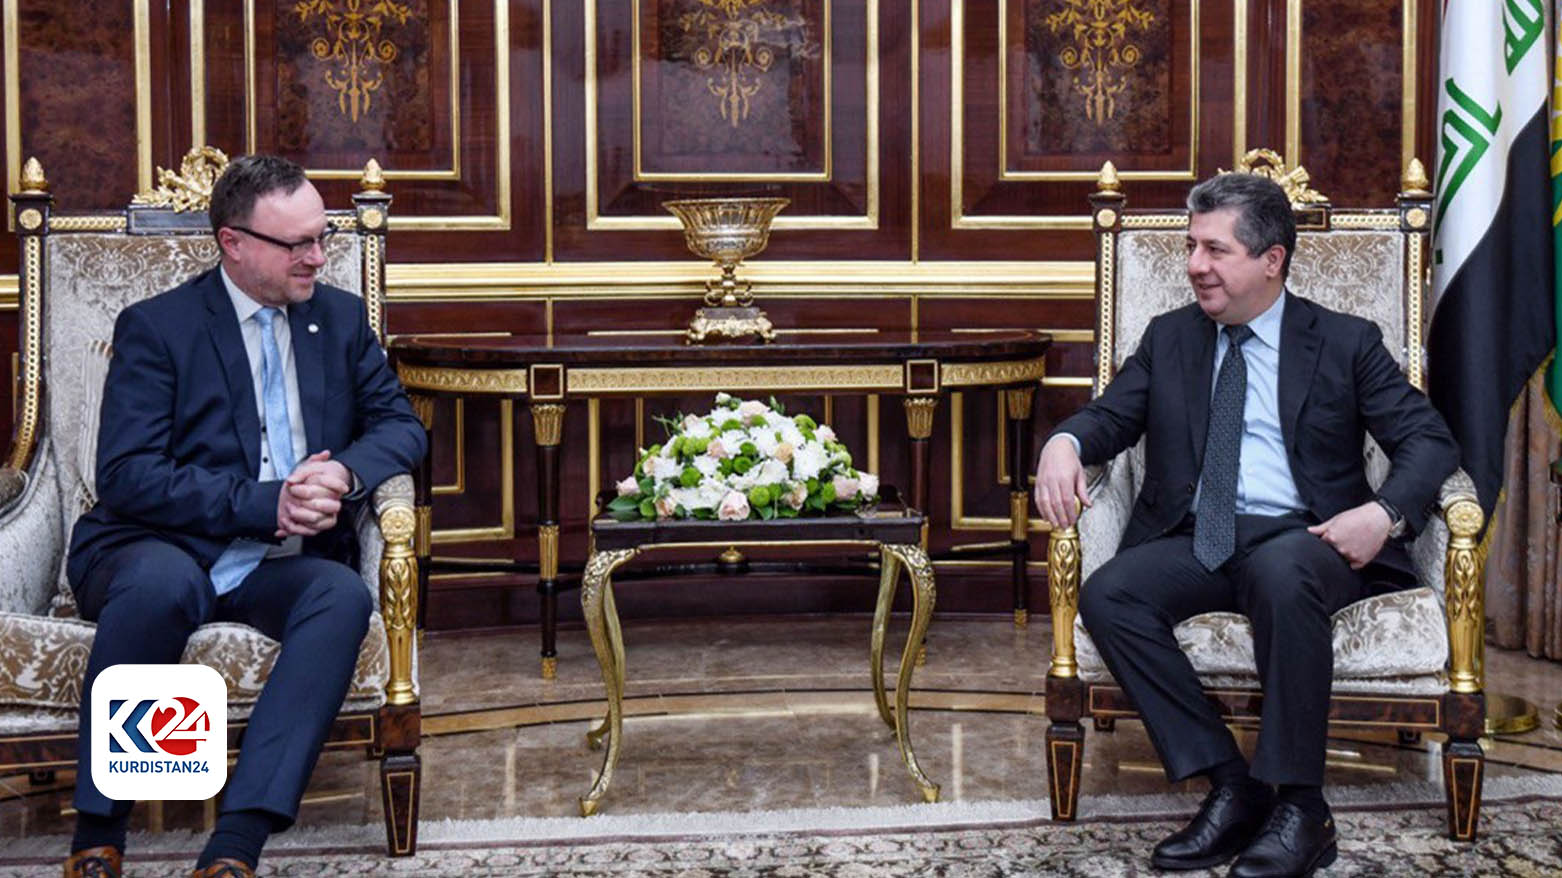 Prime Minister Masrour Barzani (Rights) met with Head of UNITAD Christian Ritscher (Left) on Monday March 18. (Photo: Kurdistan 24)